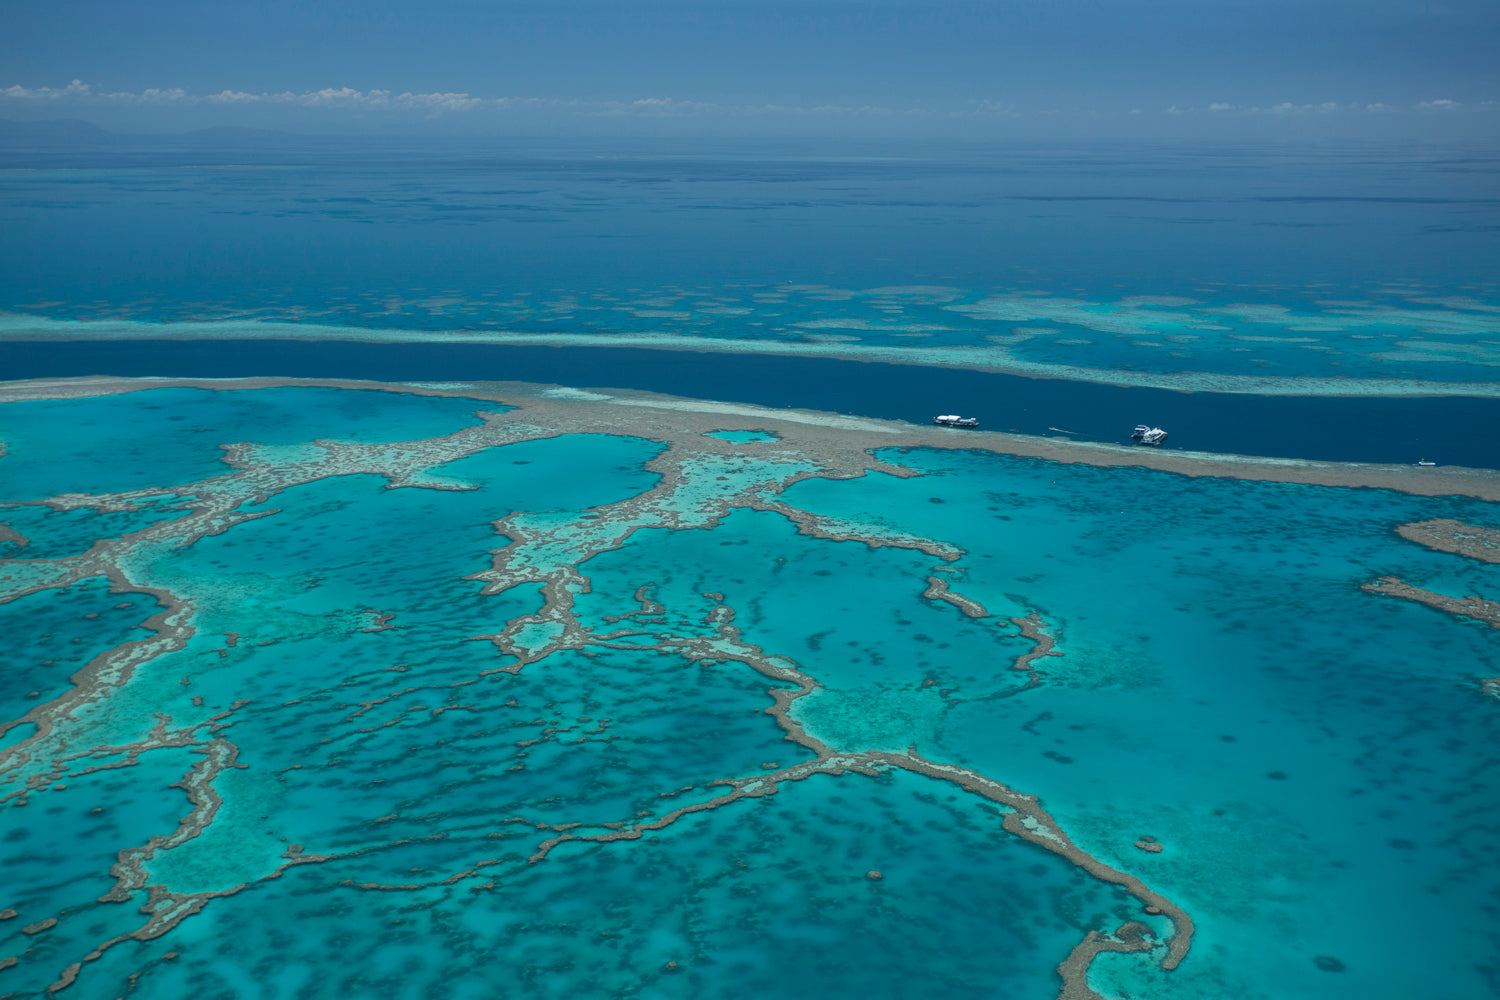 aerial of veiny coral reef amongst turquiose water deep water beyond with large boats on anchor